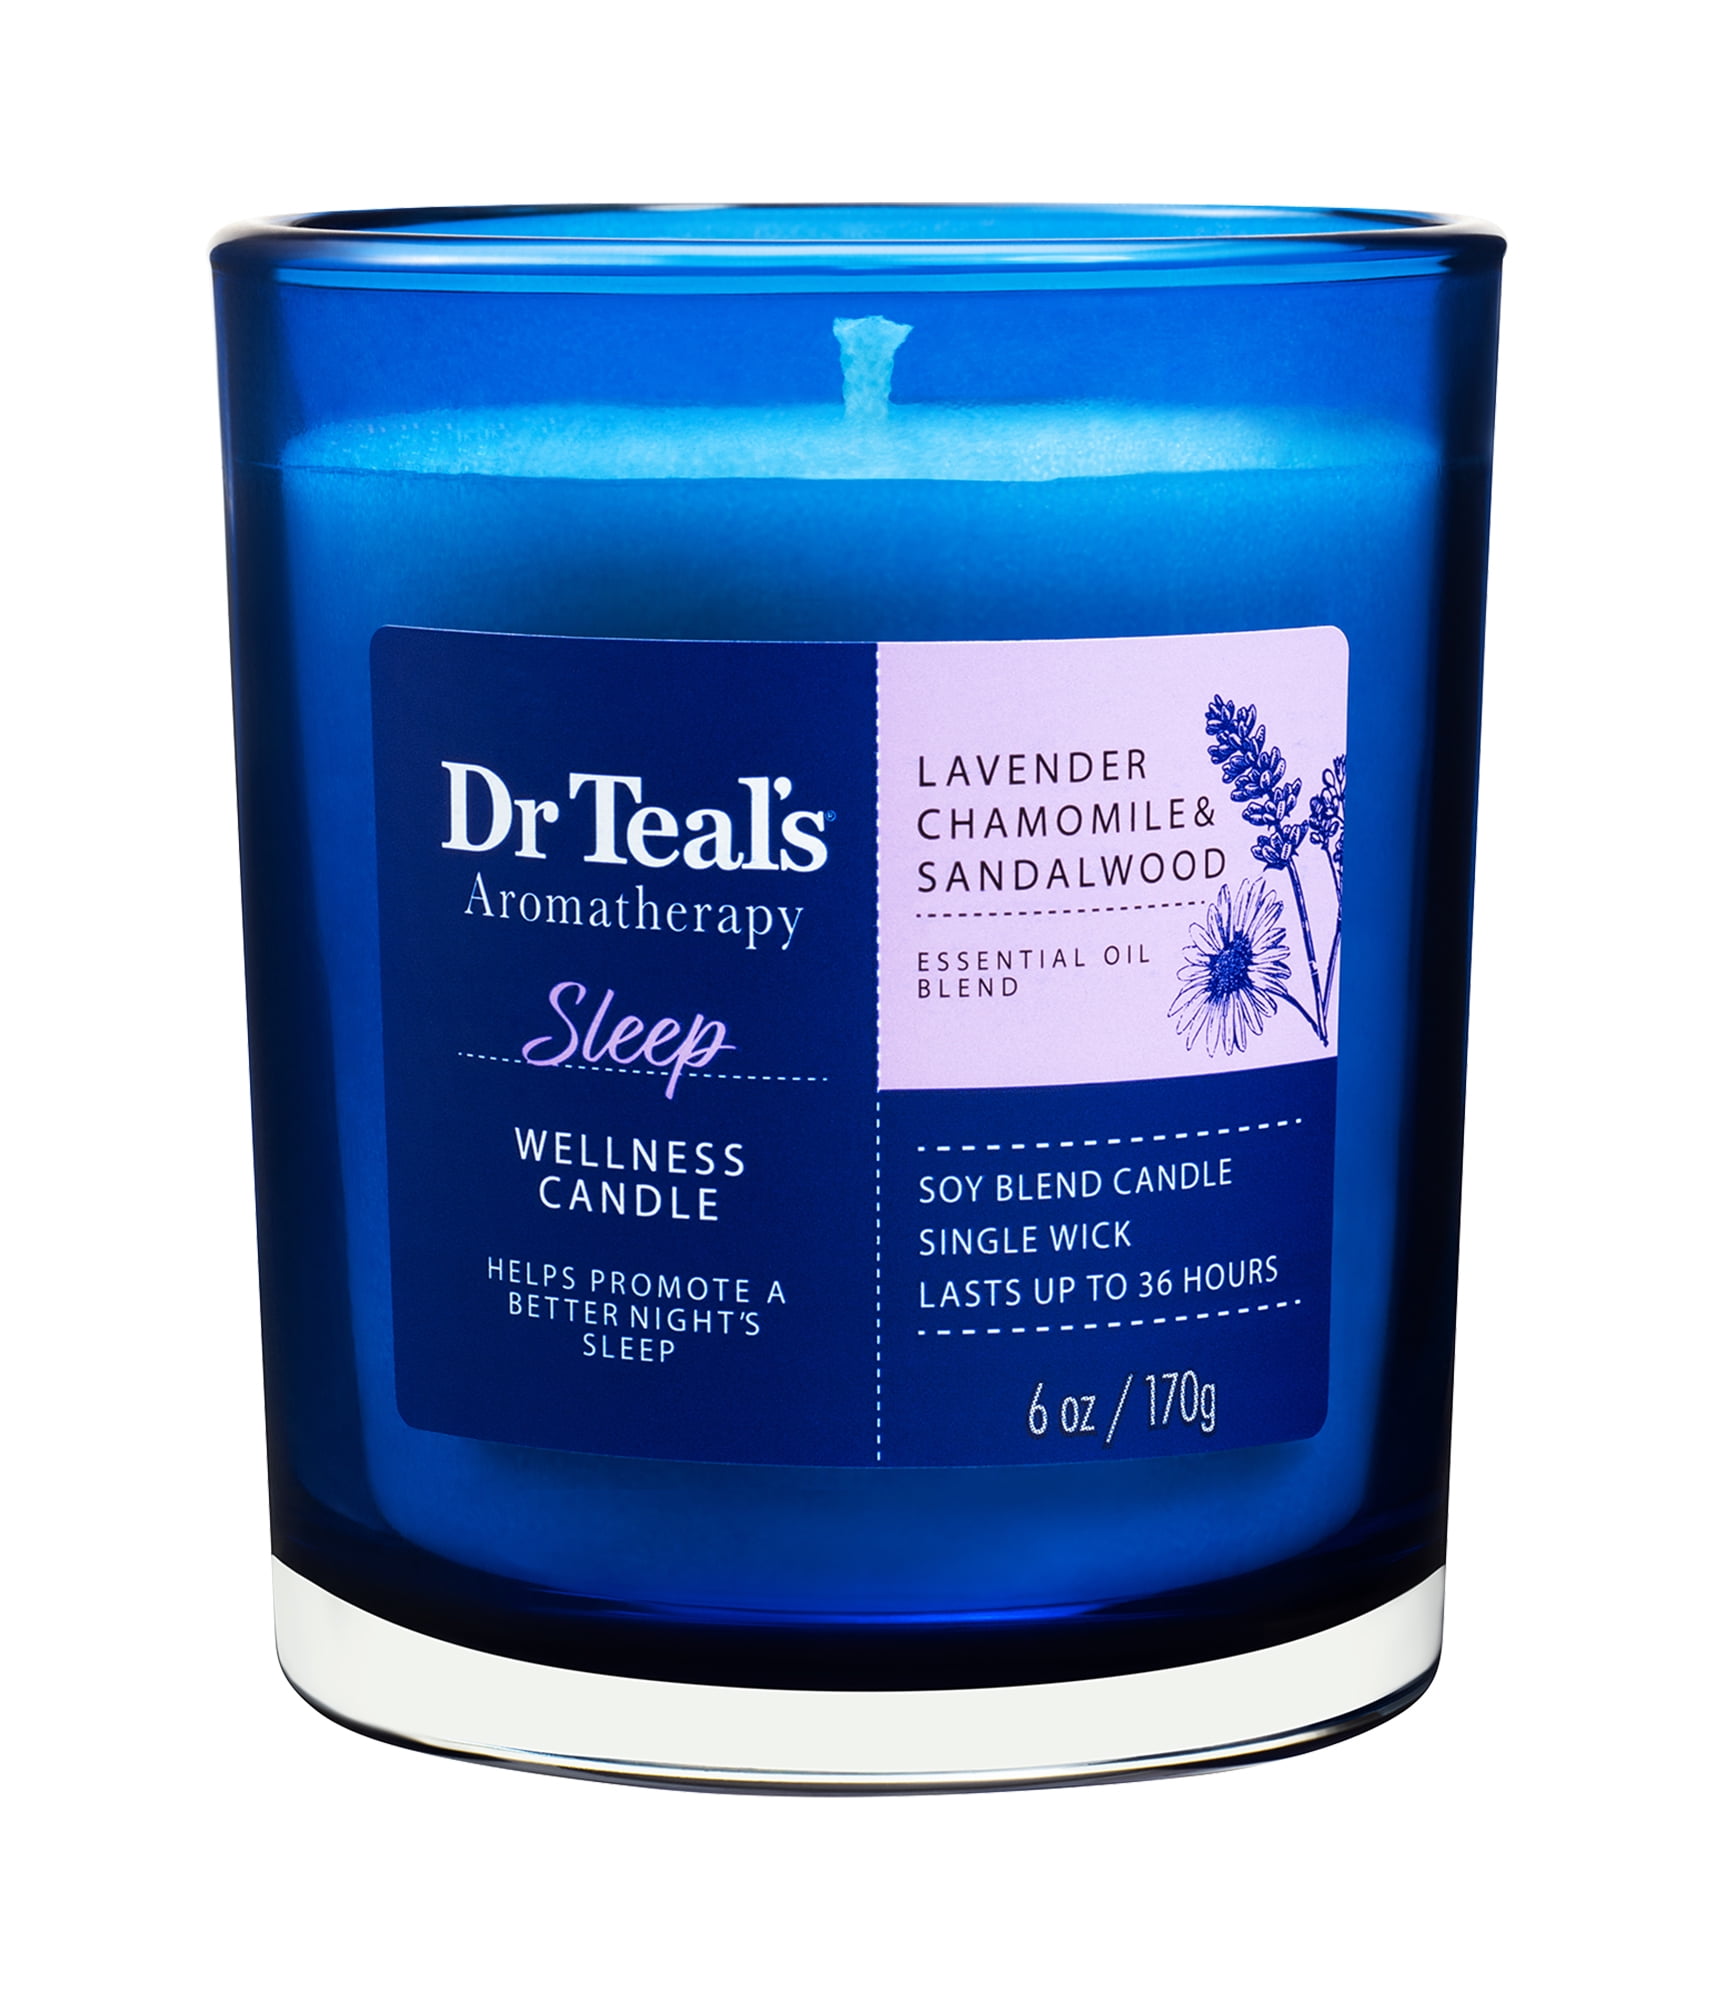 Dr Teal's Aromatherapy Sleep Wellness Candle with Lavender & Chamomile, 6 oz